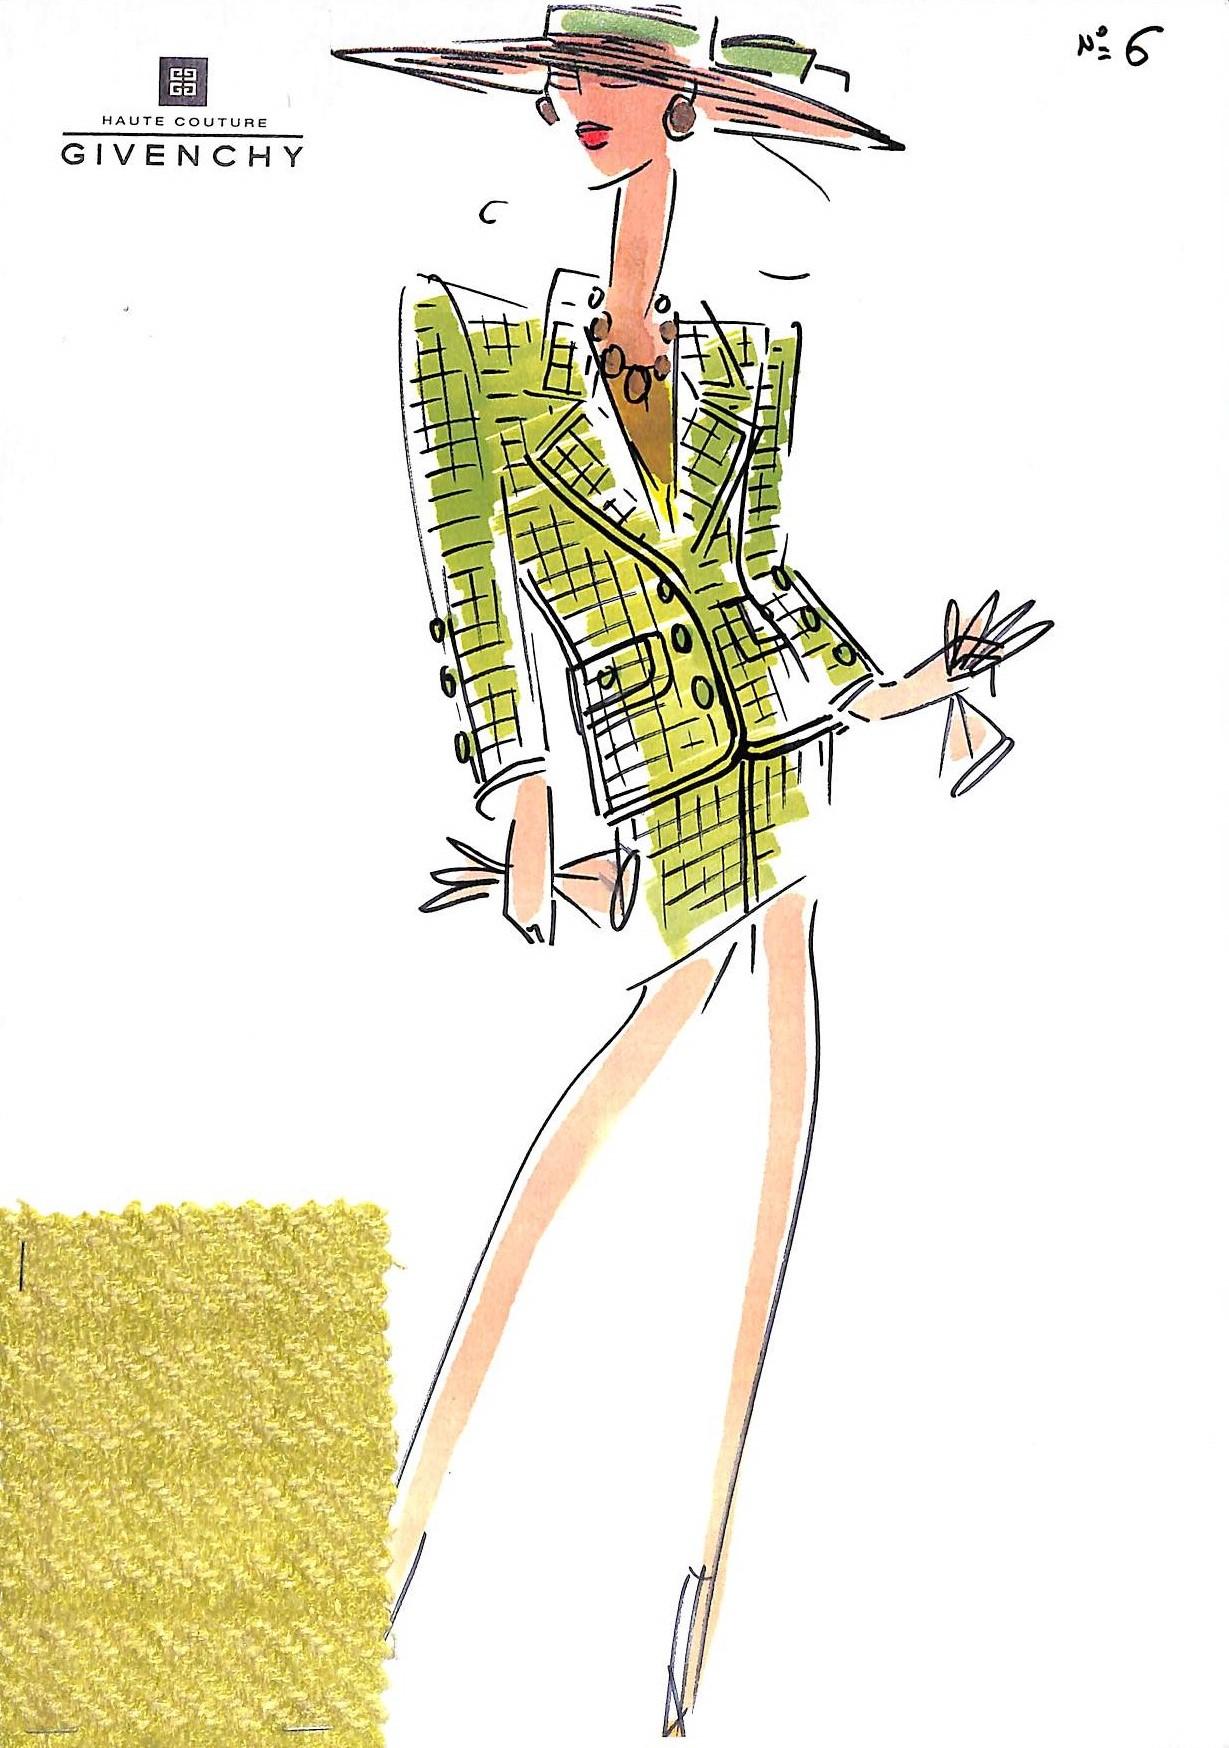 "Givenchy Haute Couture Paris No 6 Fashion Illustration w/ Fabric Swatch" - Art by Givenchy (atelier)